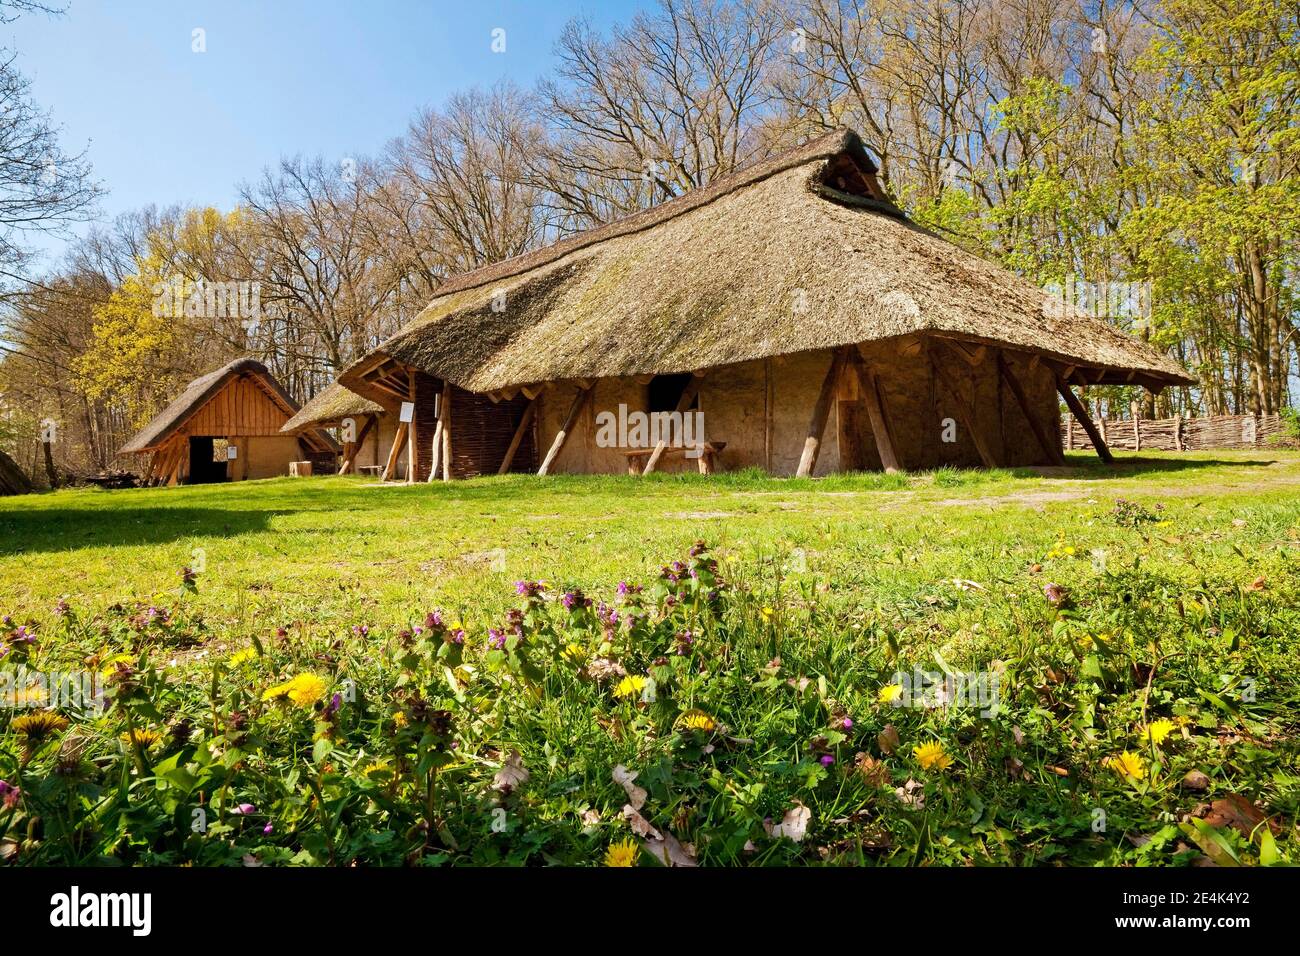 Replica of a farmstead from the time around 800 AD, Sachsenhof open-air museum, Greven, Muensterland, North Rhine-Westphalia, Germany Stock Photo